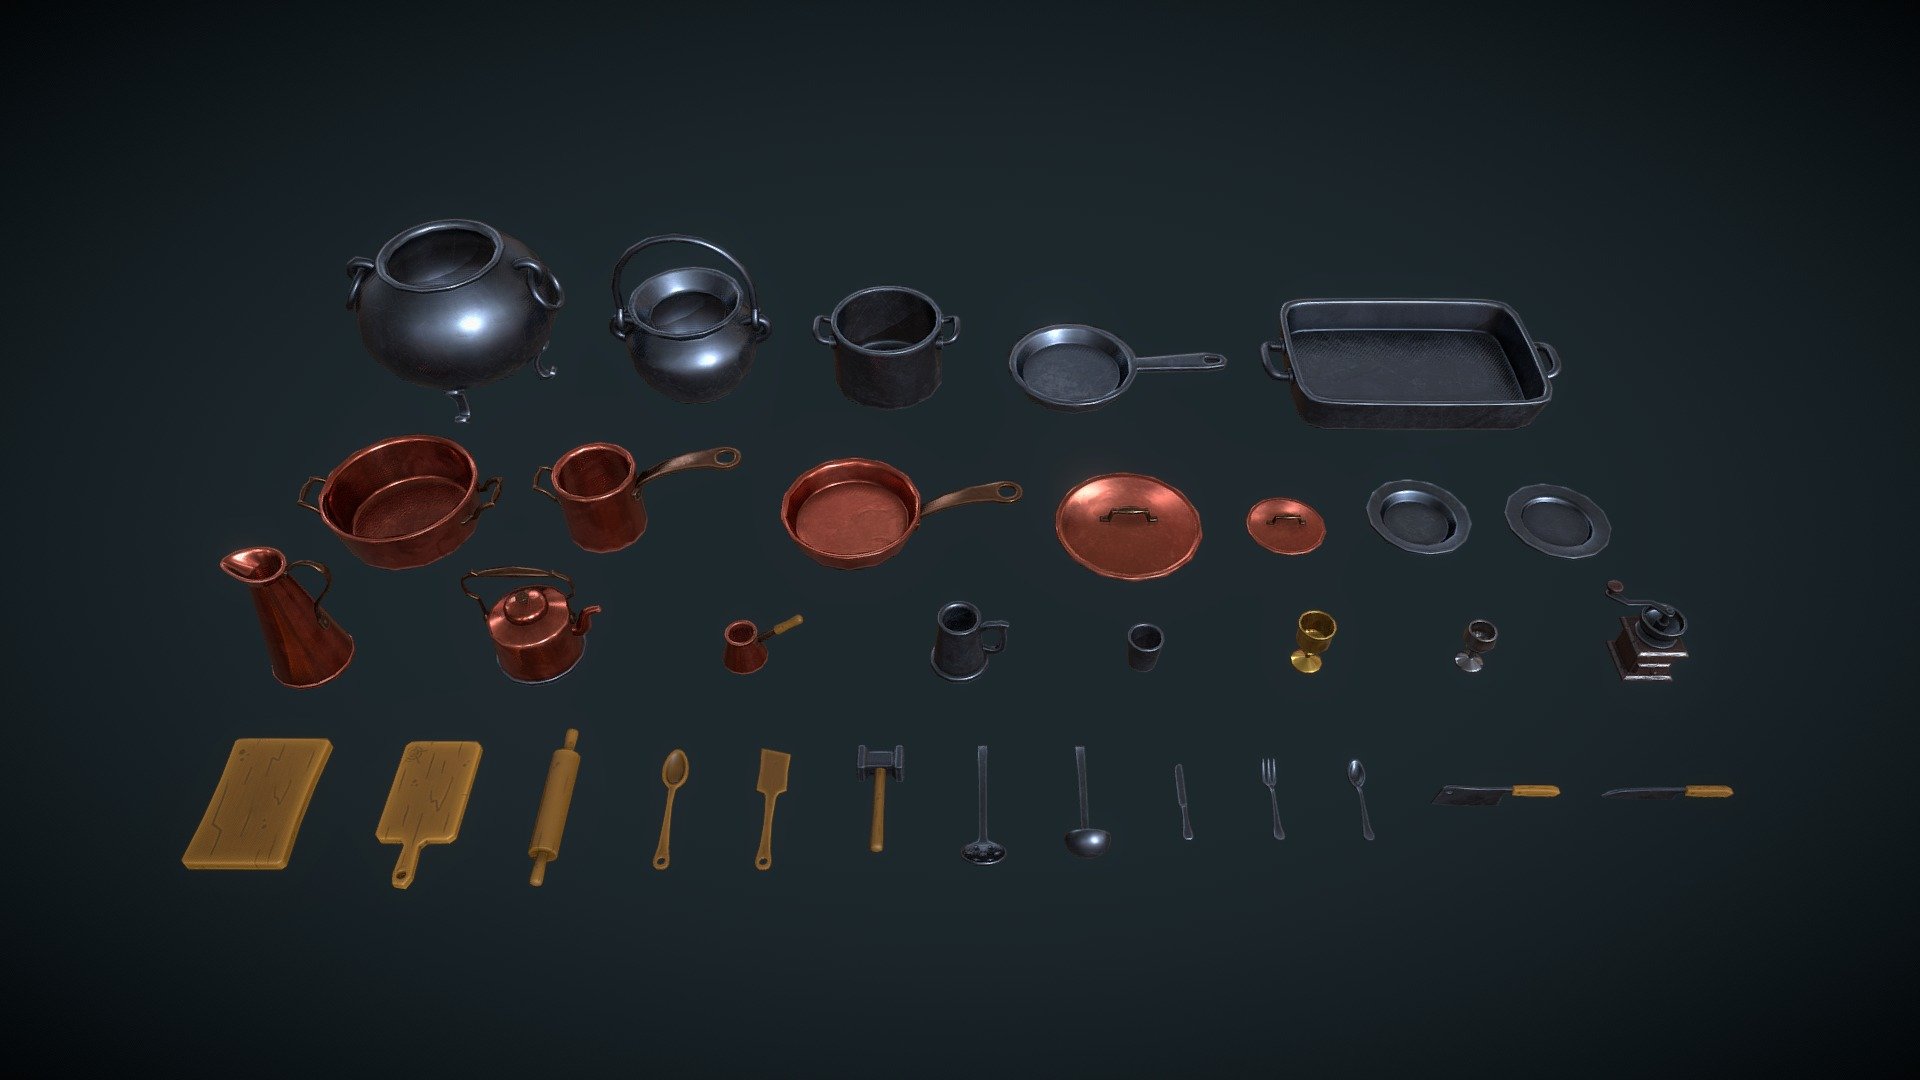 The set includes: two types of cauldron, a pot, a frying pan, a baking pan, a copper pot, small copper pot, a copper frying pan, two types of copper lid, a deep plate, a shallow plate, a copper pitcher, a copper kettle, a copper coffee pot, a beer mug, a mug, a gold cup, a silver cup, a manual coffee grinder, two types of wooden cutting board, a rolling pin, a wooden spoon, a wooden spatula, a meat tenderizer, a slotted spoon, a ladle, a table knife, a fork, a spoon, a cleaver and a kitchen knife.

Texture size: 4096x4096 Including maps: Base Color, Roughness, Metalness, Normal

Lowpoly, gameready - Stylized set: Kitchen equipment - Buy Royalty Free 3D model by Mamo3D 3d model